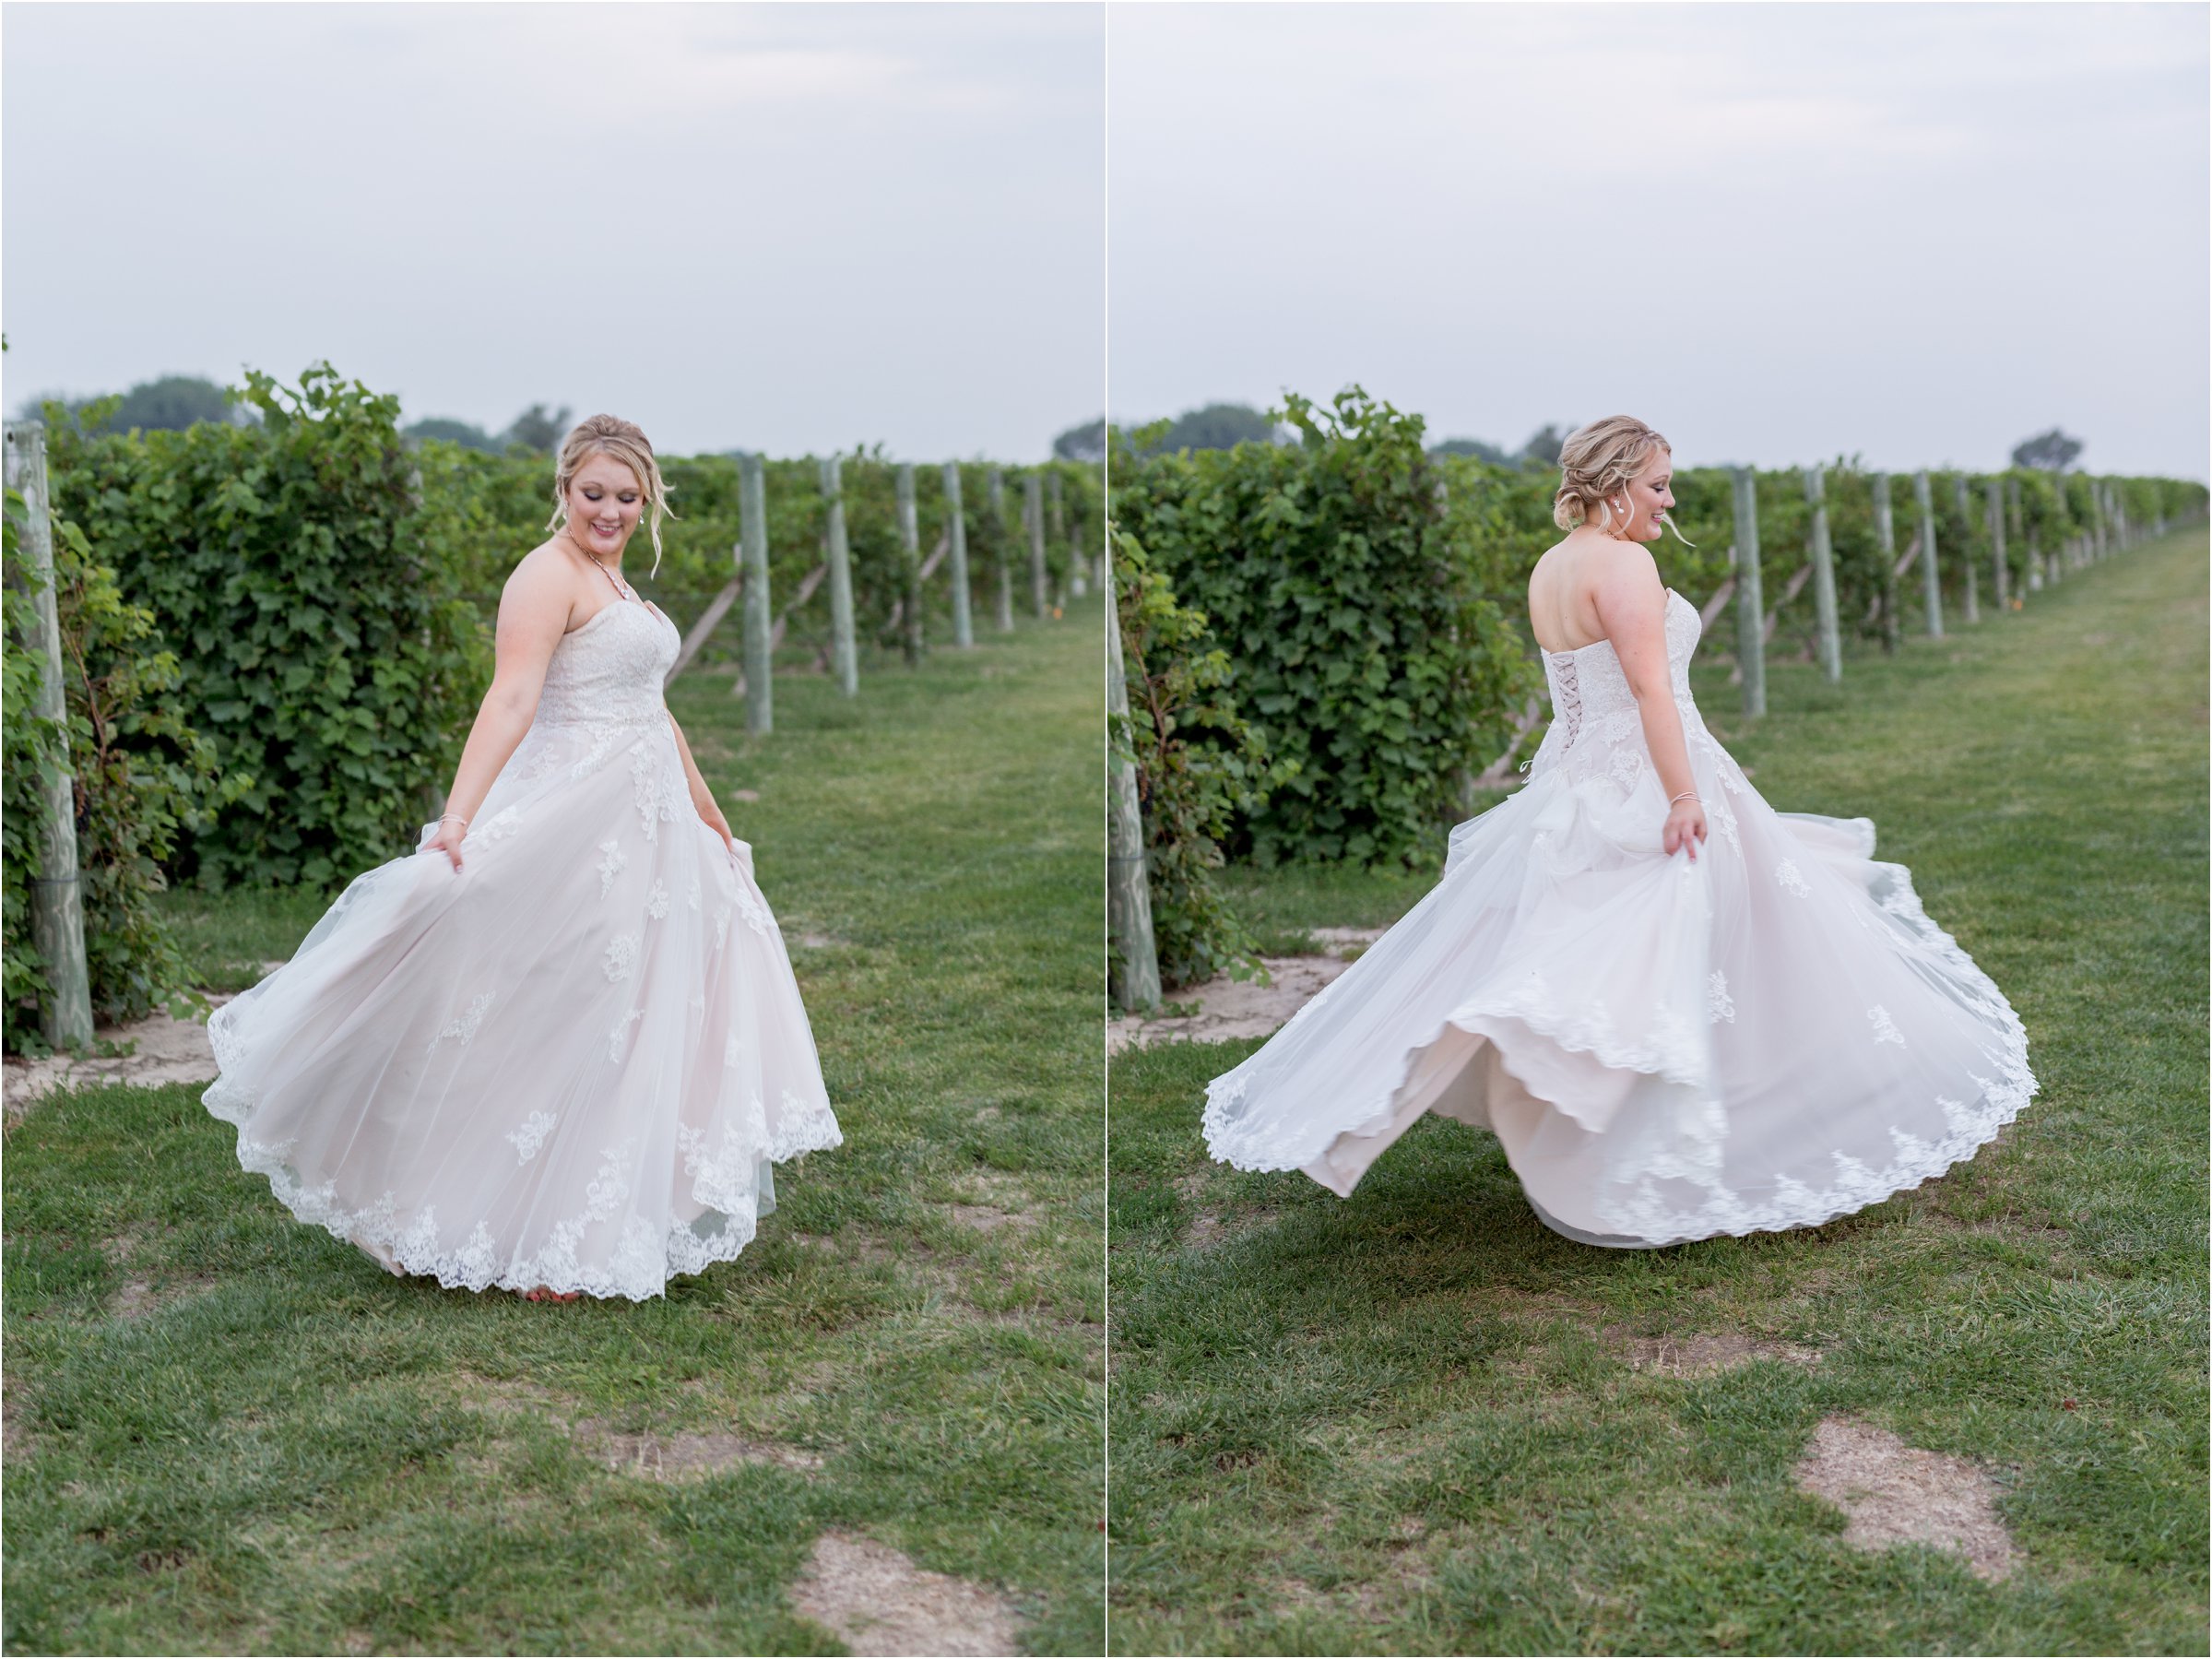 the bride twirling in her wedding dress in front of grape vines